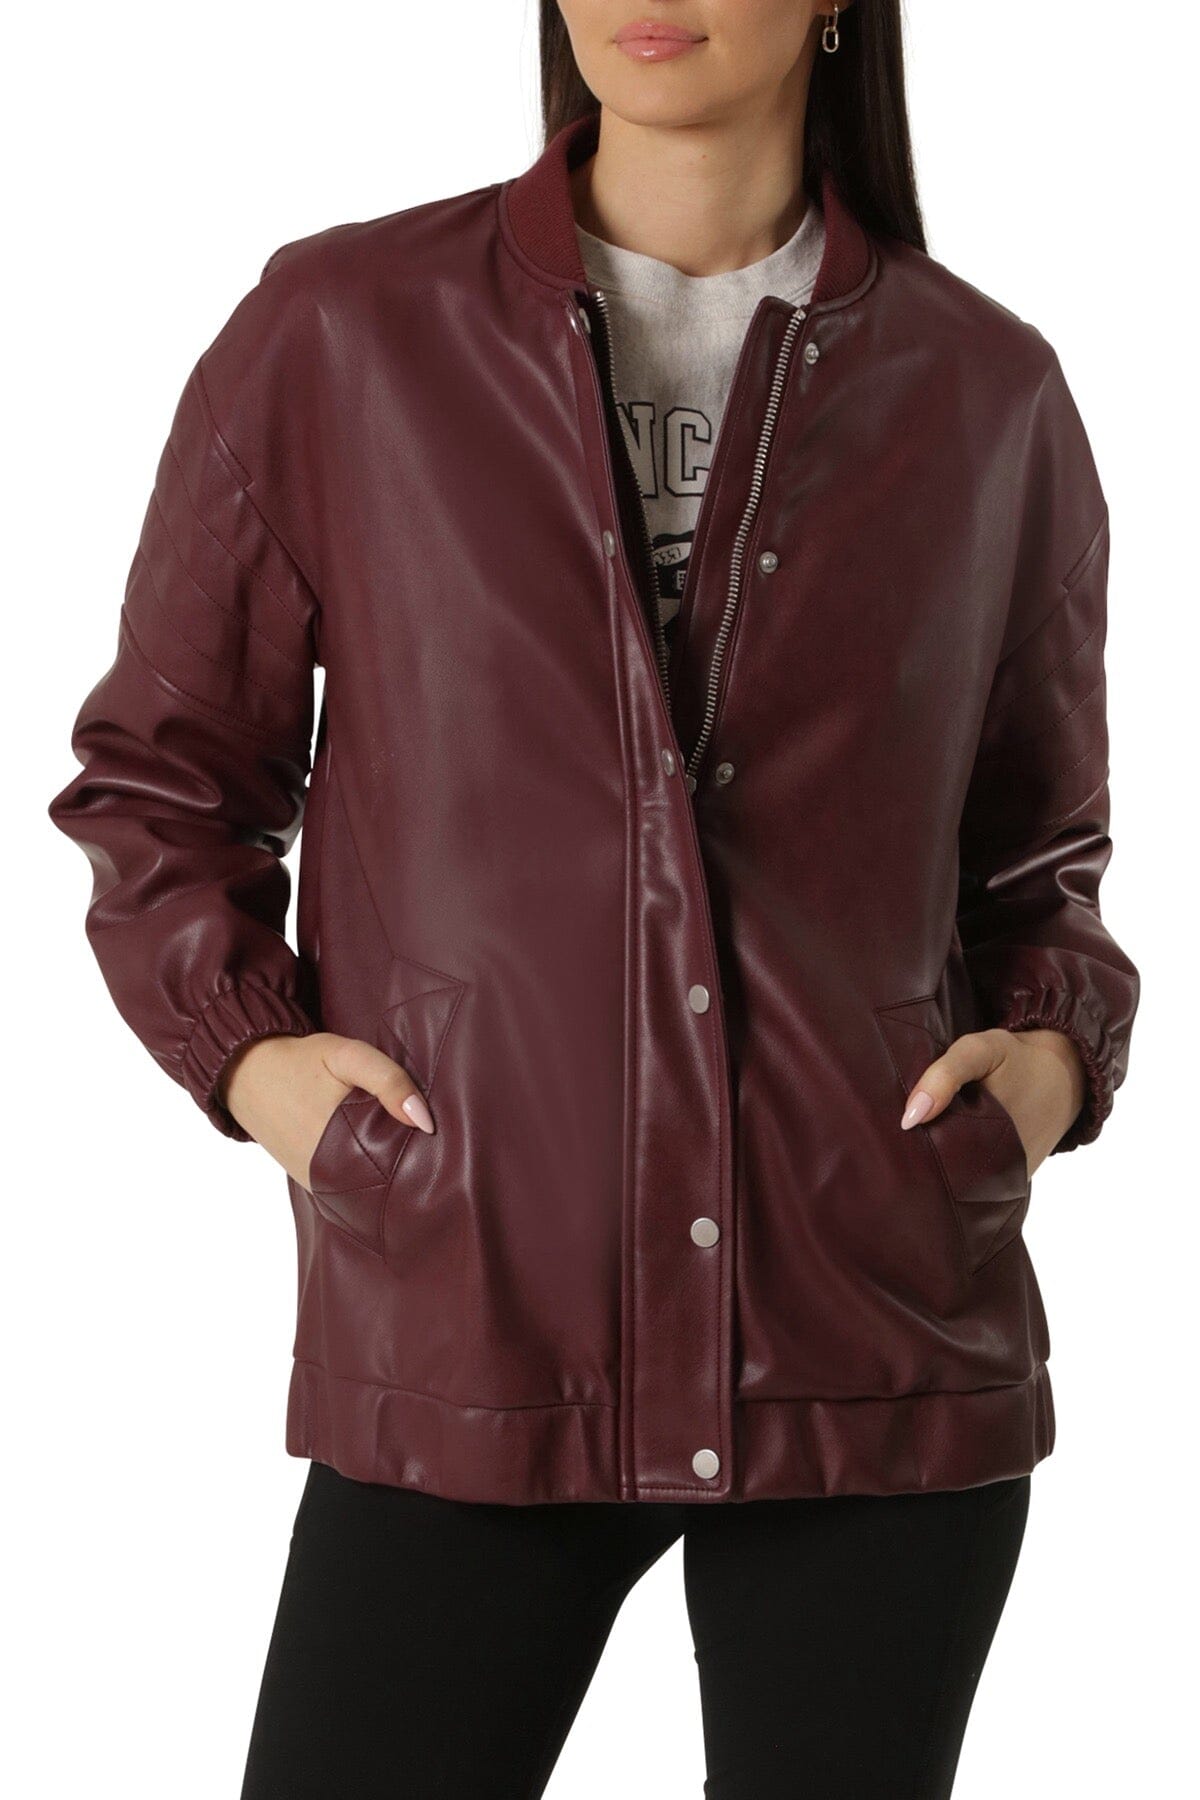 Zinfandel red faux ever vegan leather relaxed bomber jacket coat - women's figure flattering bombers jackets coats for fall 2023 trends